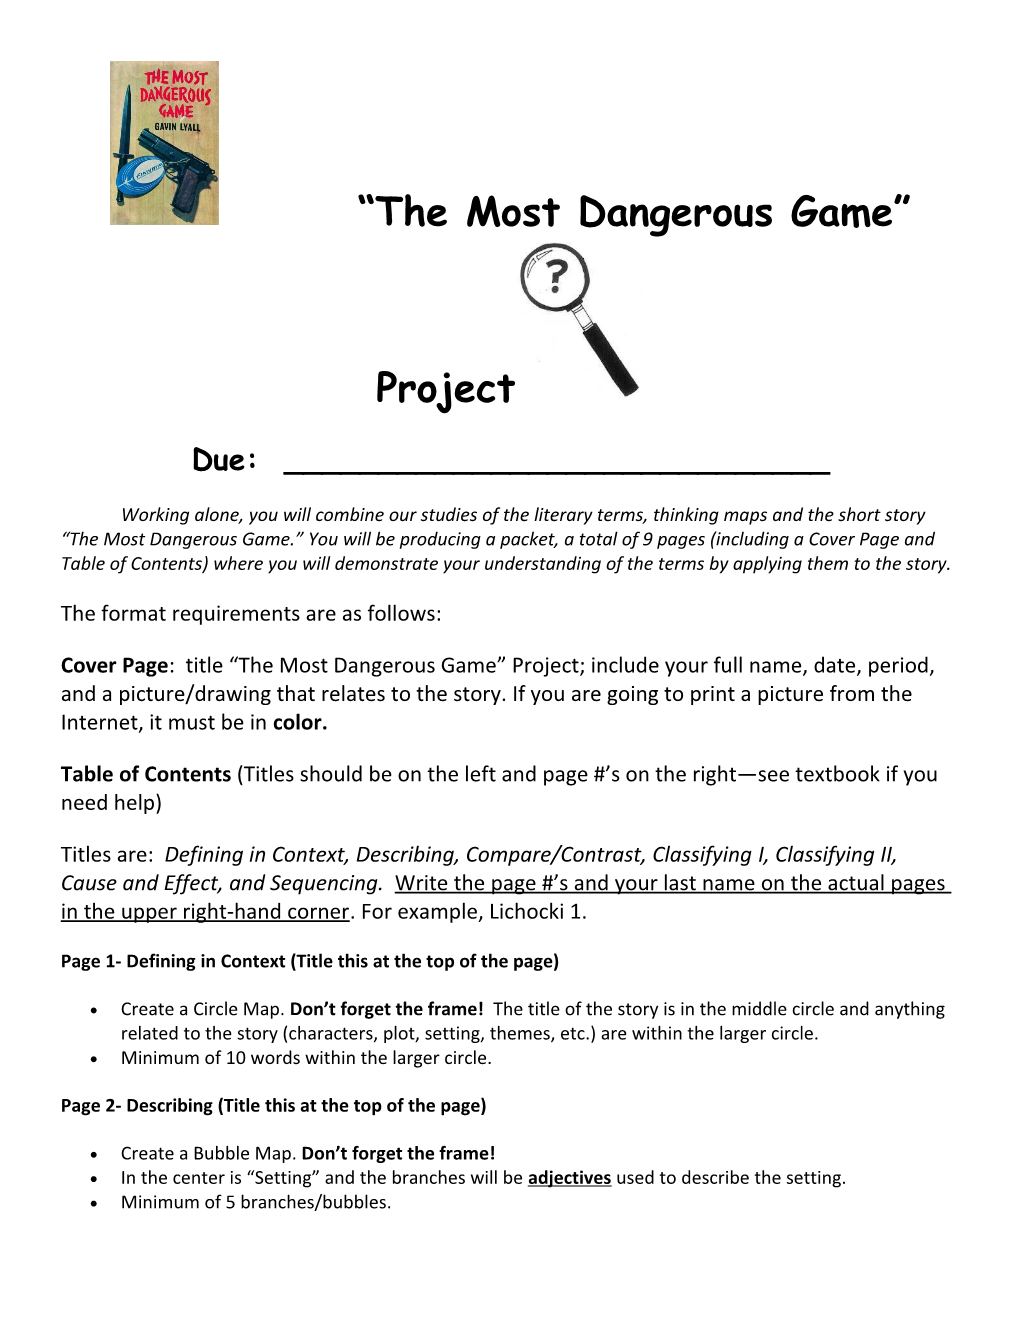 The Most Dangerous Game Project